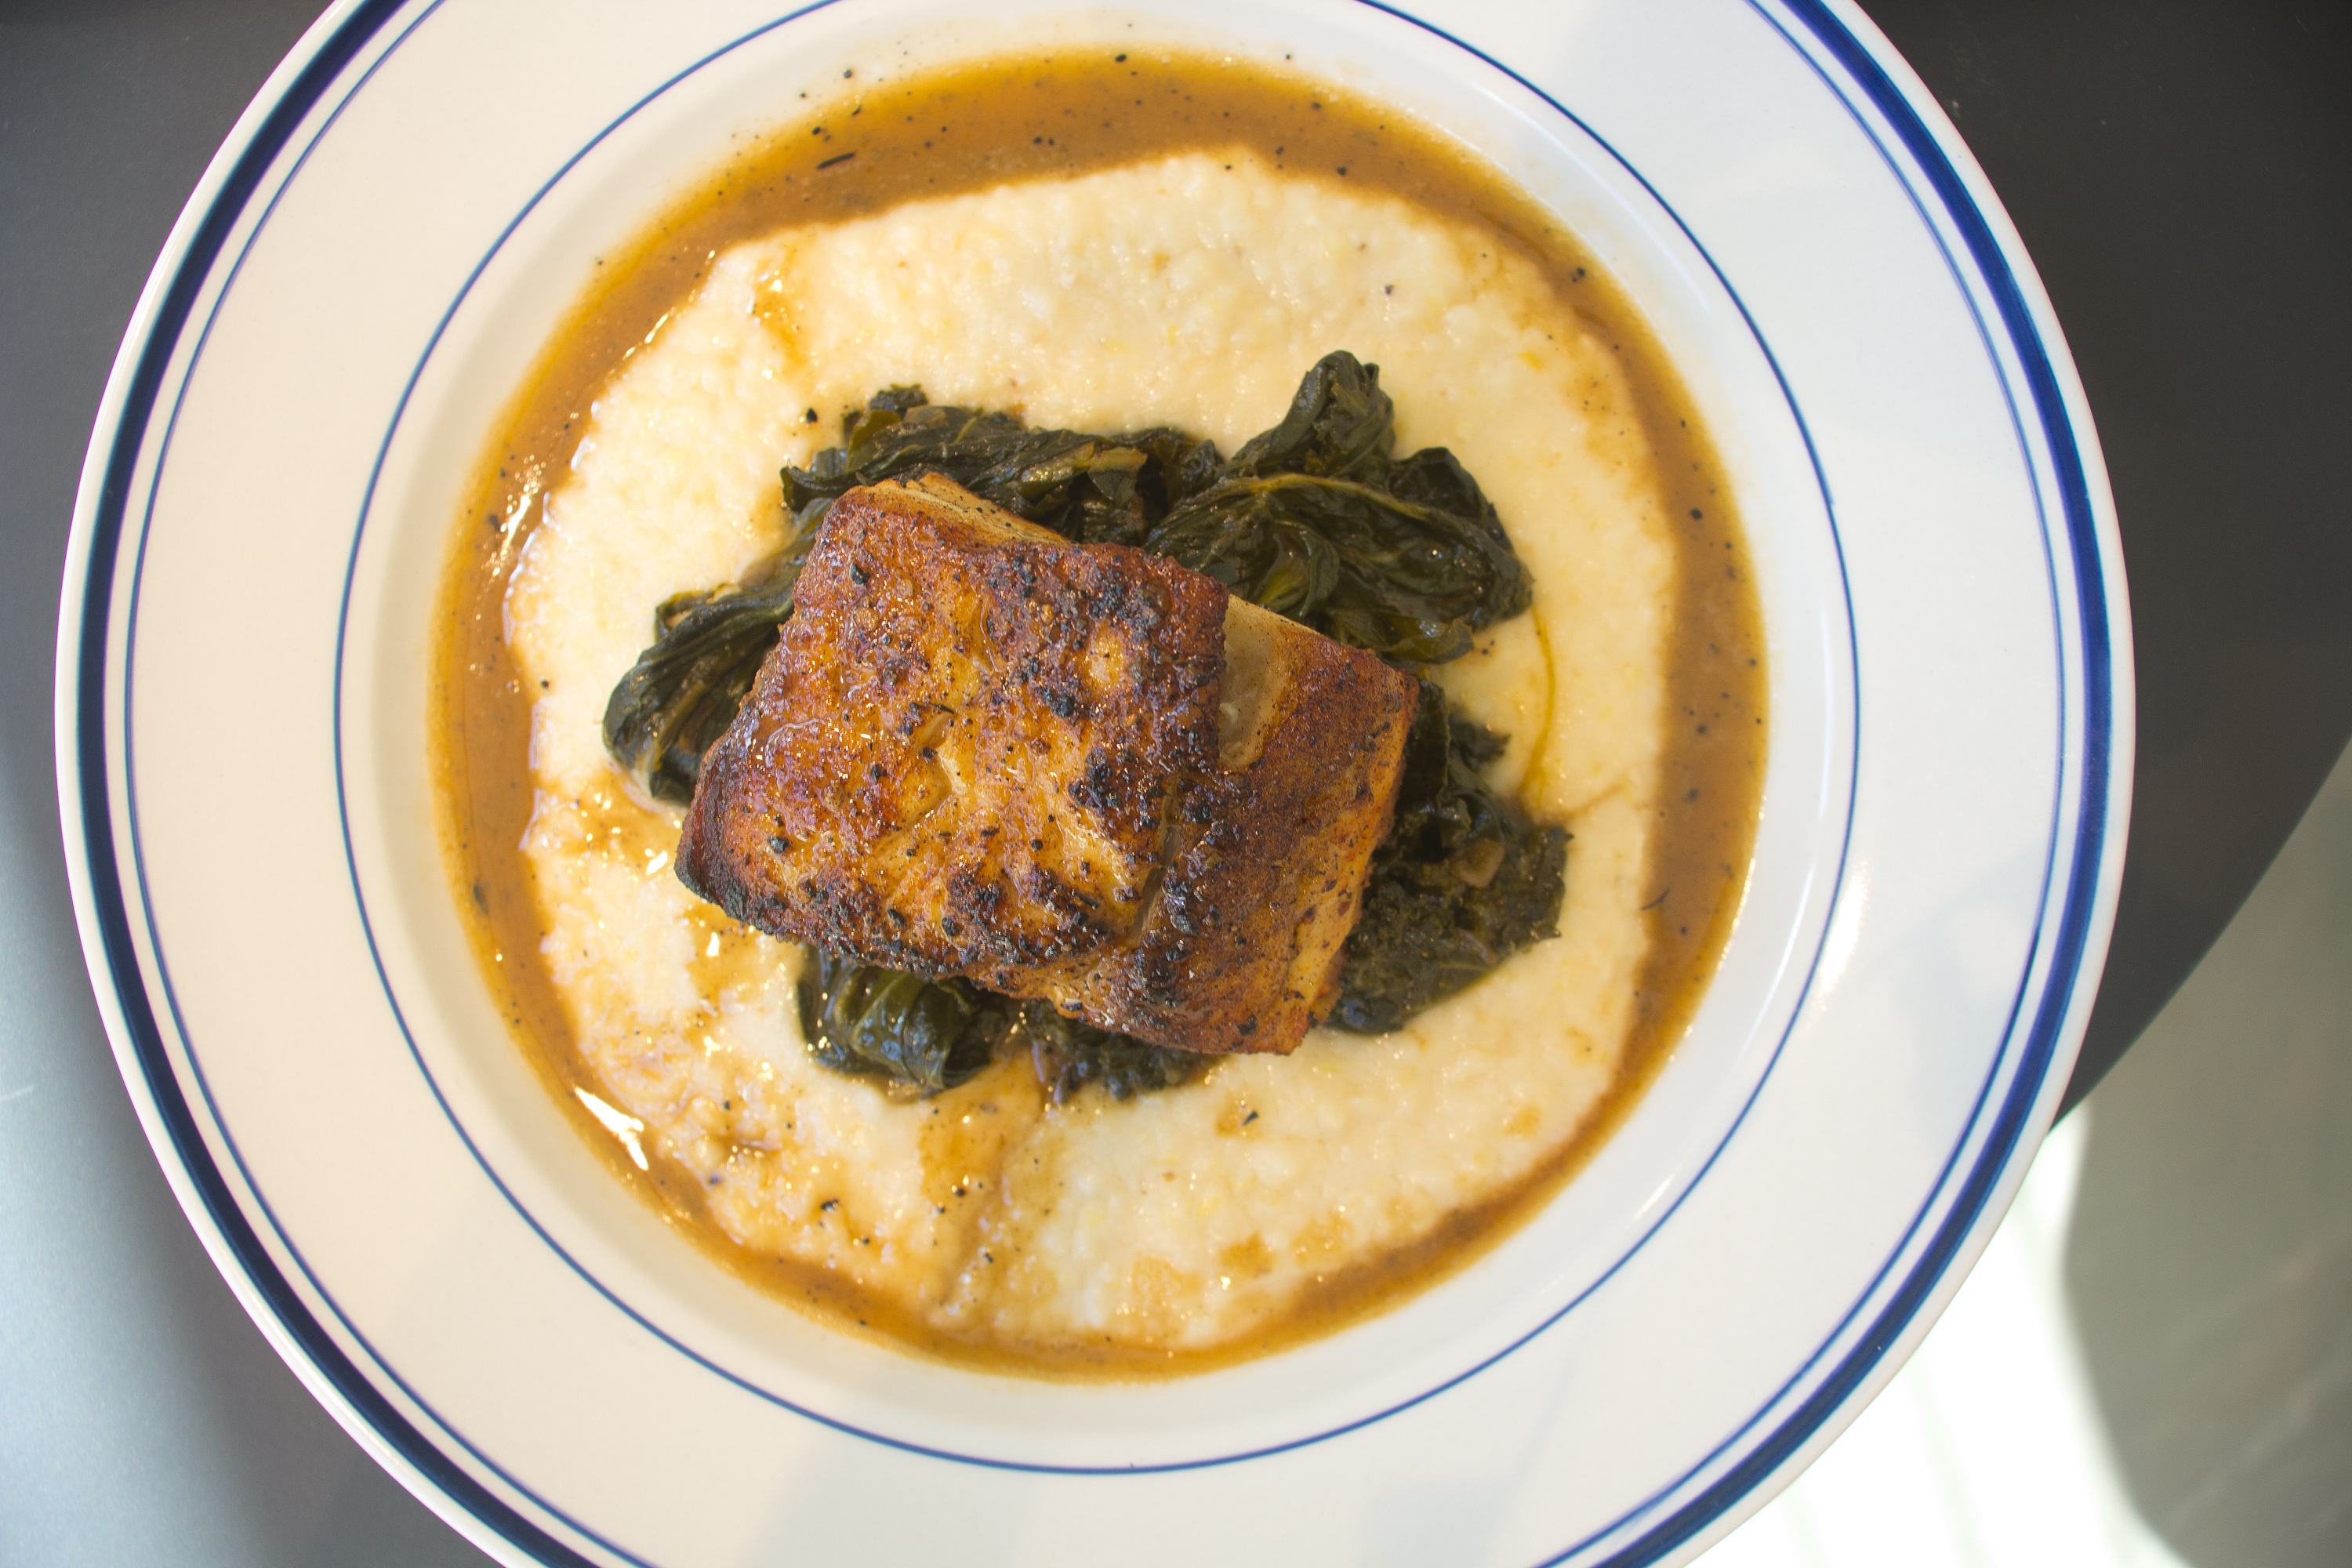 A plate of creamy grits in a brown sauce topped with cooked greens and a piece of brownish fish.